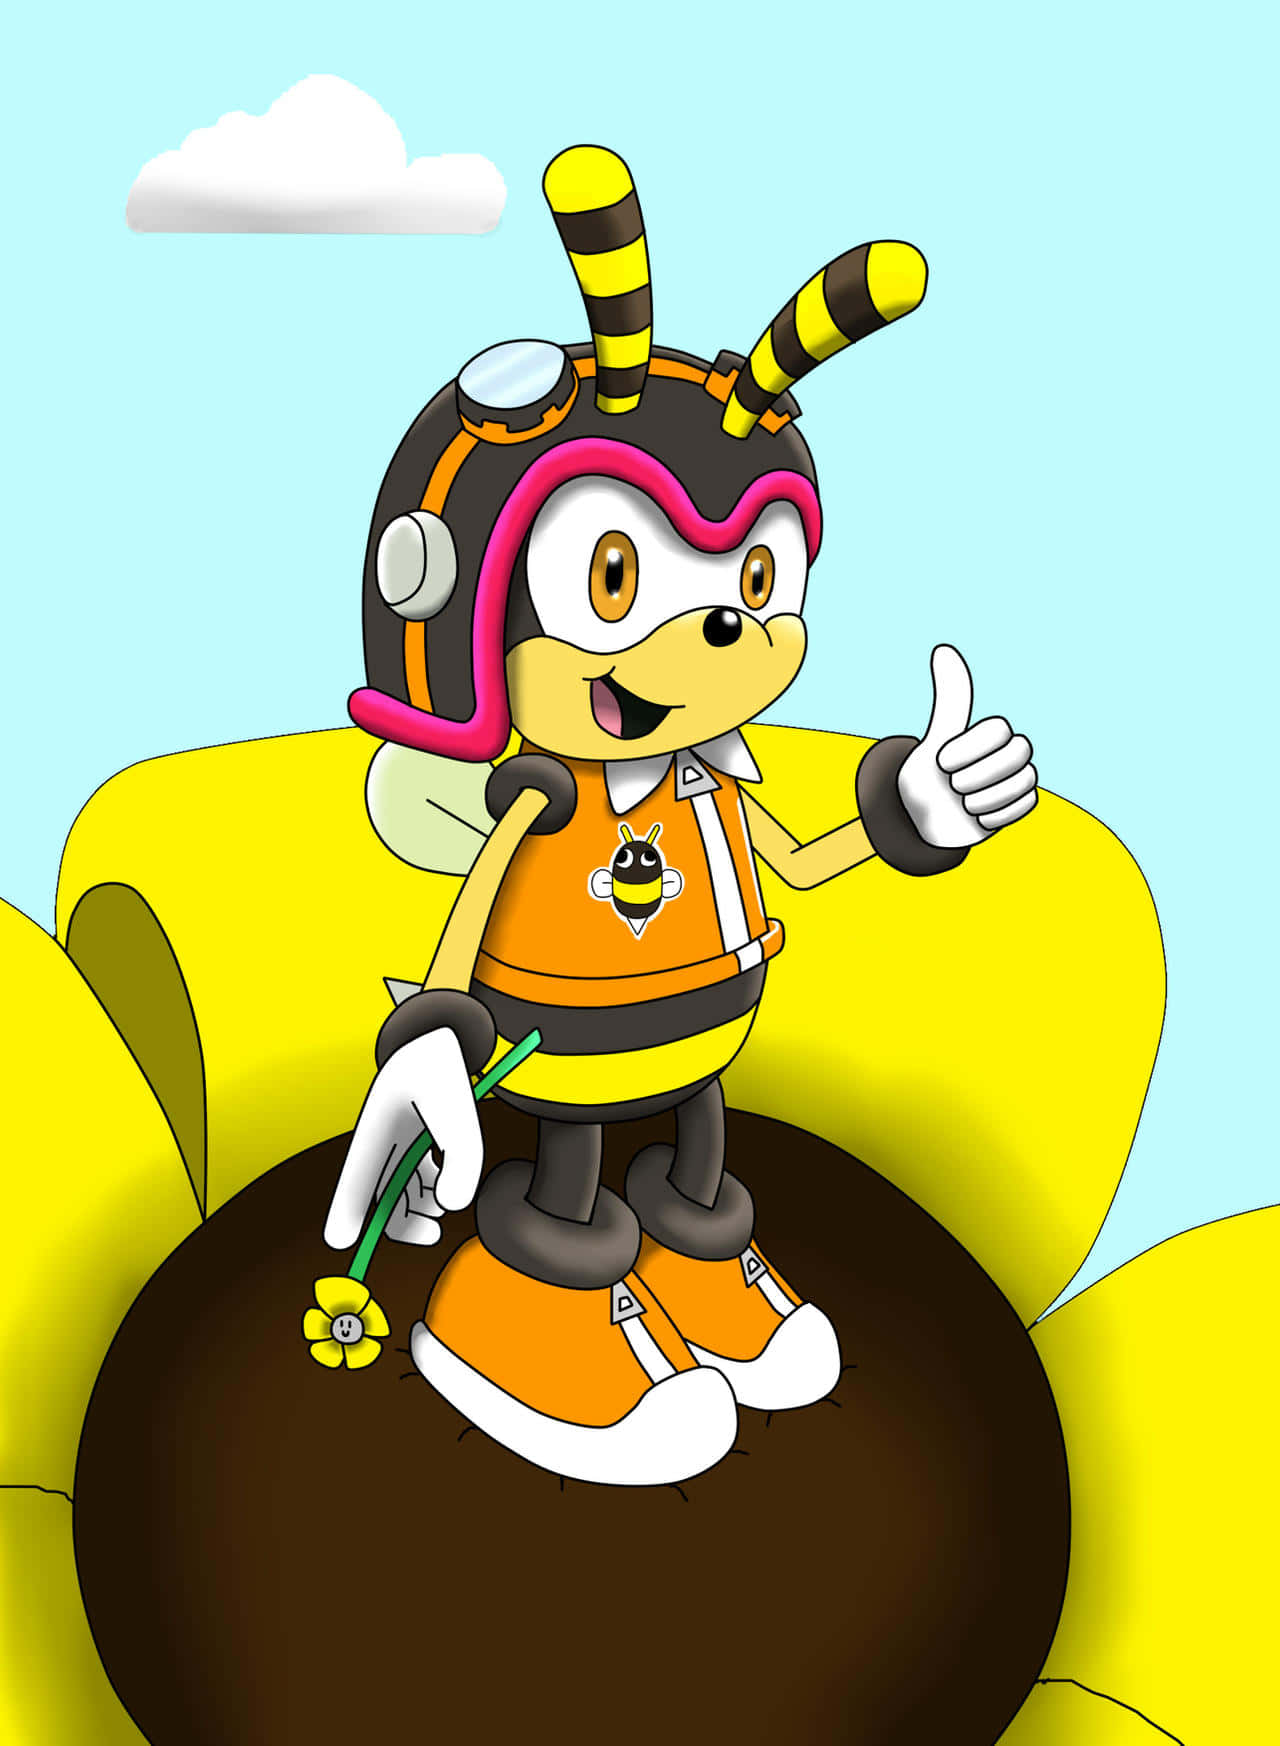 Charmy Bee in action, flying with a big smile in a colorful world Wallpaper